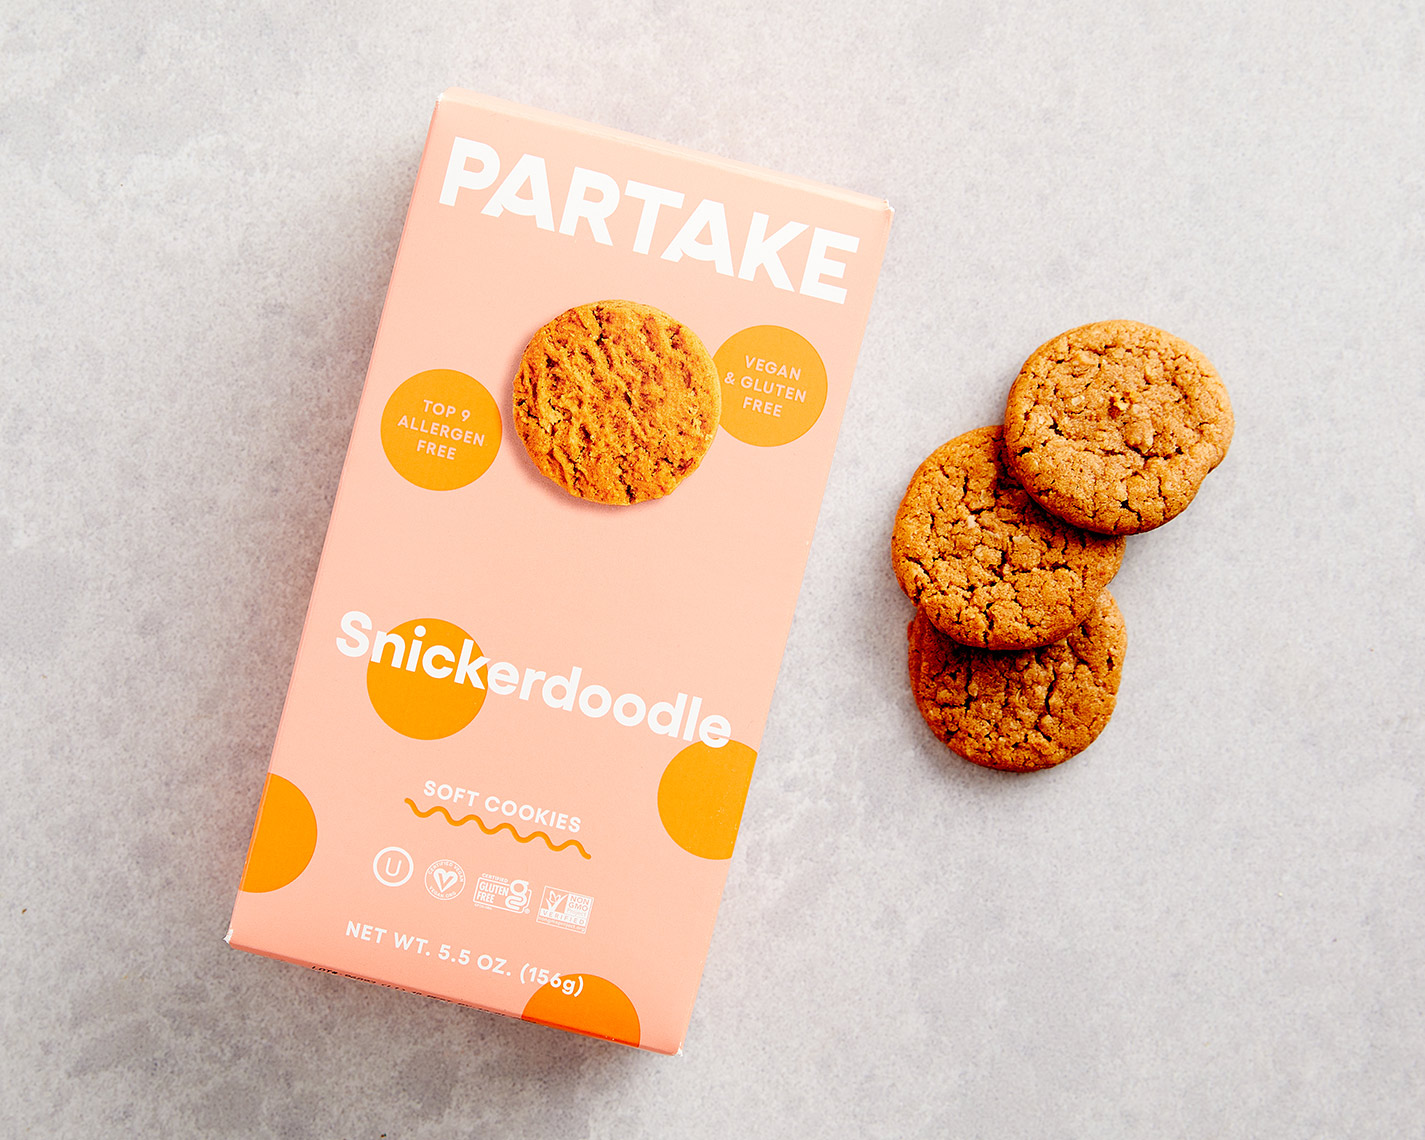 43416-Partake-Soft-Baked-Snickerdoodle-Cookies-Styled-4x5